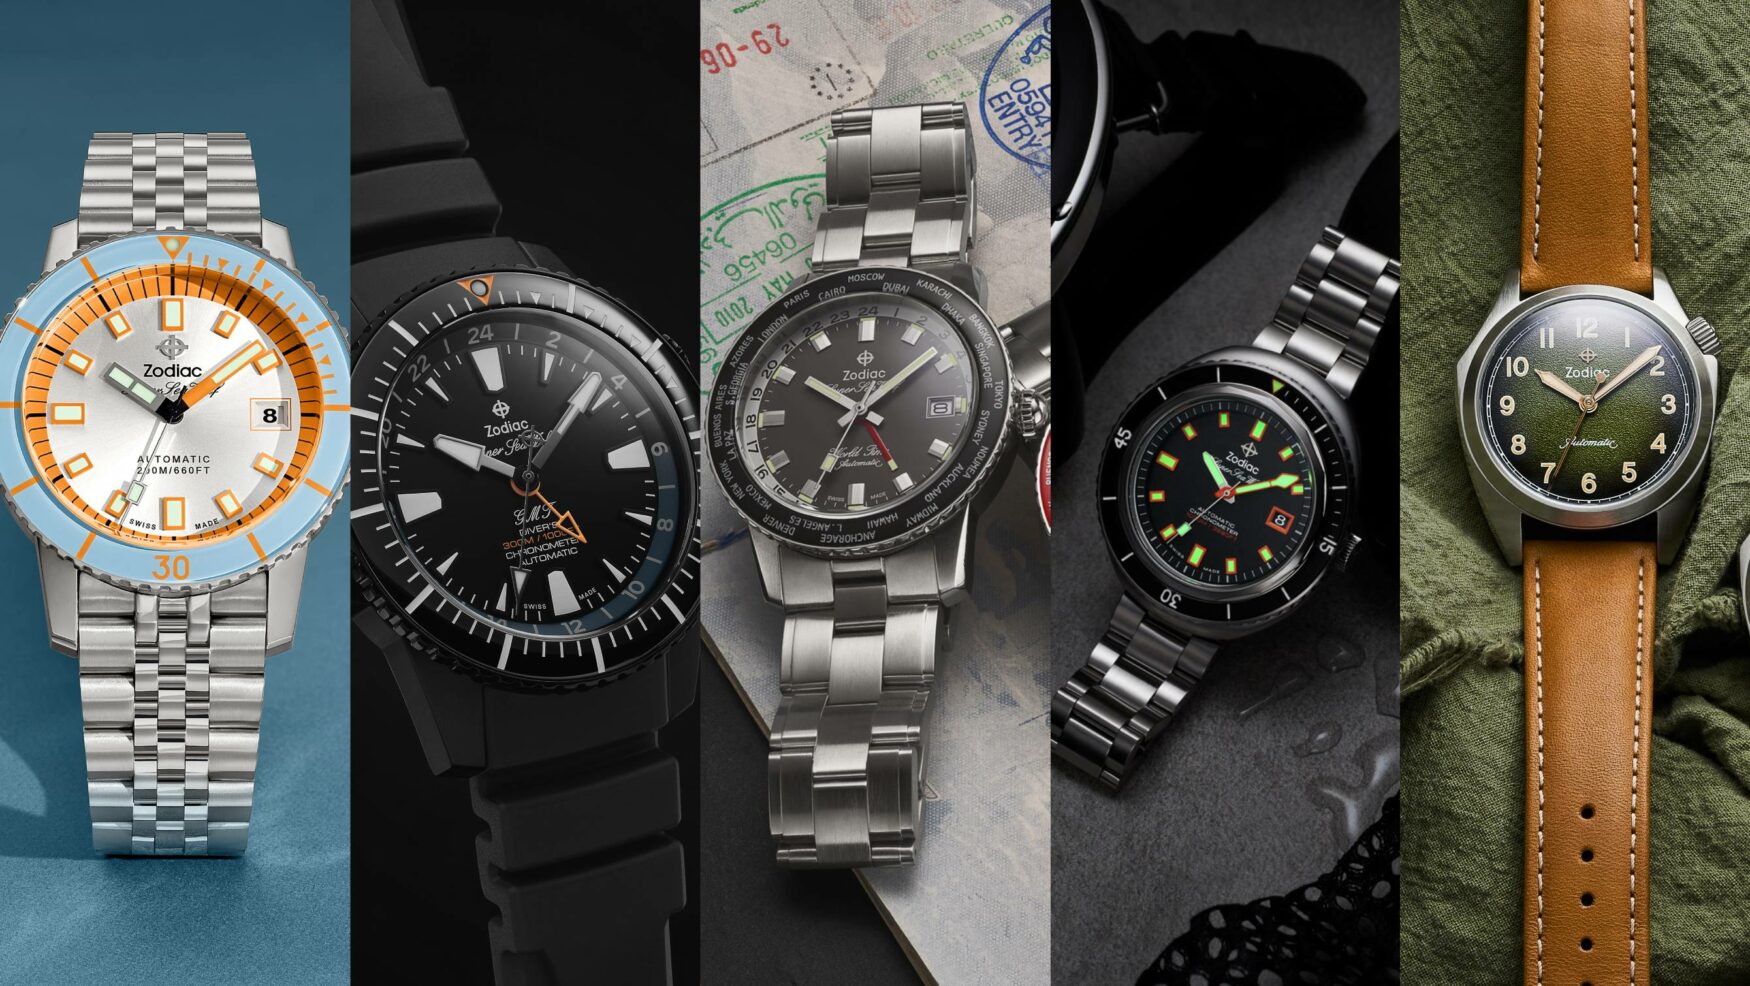 The Time+Tide Shop becomes the exclusive Australian retailer of Zodiac – a pioneering dive watch brand